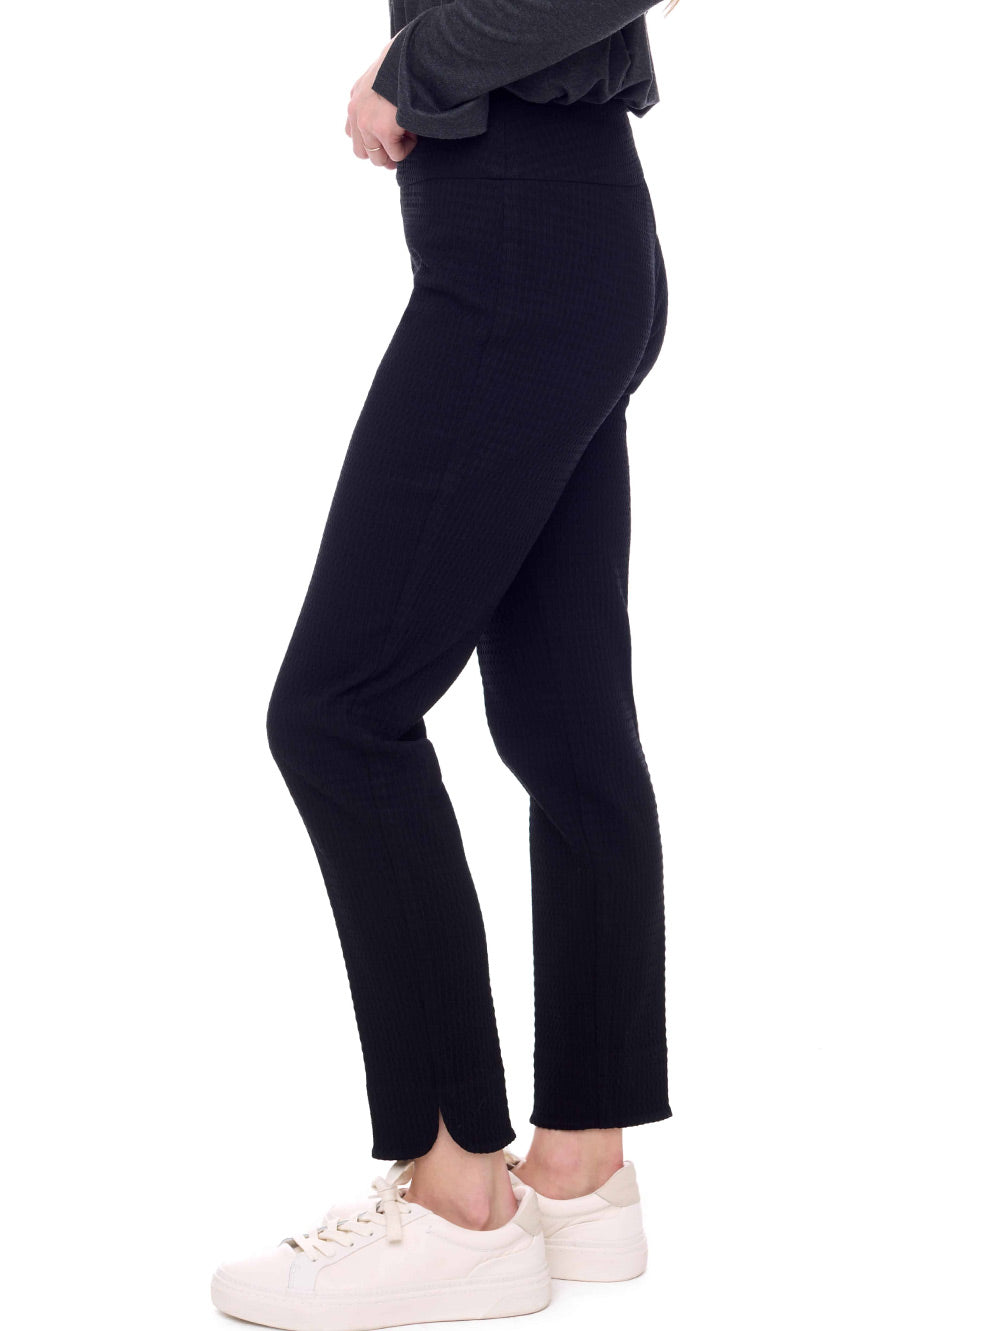 UP! BOSS TECHNO SLIM ANKLE PANT